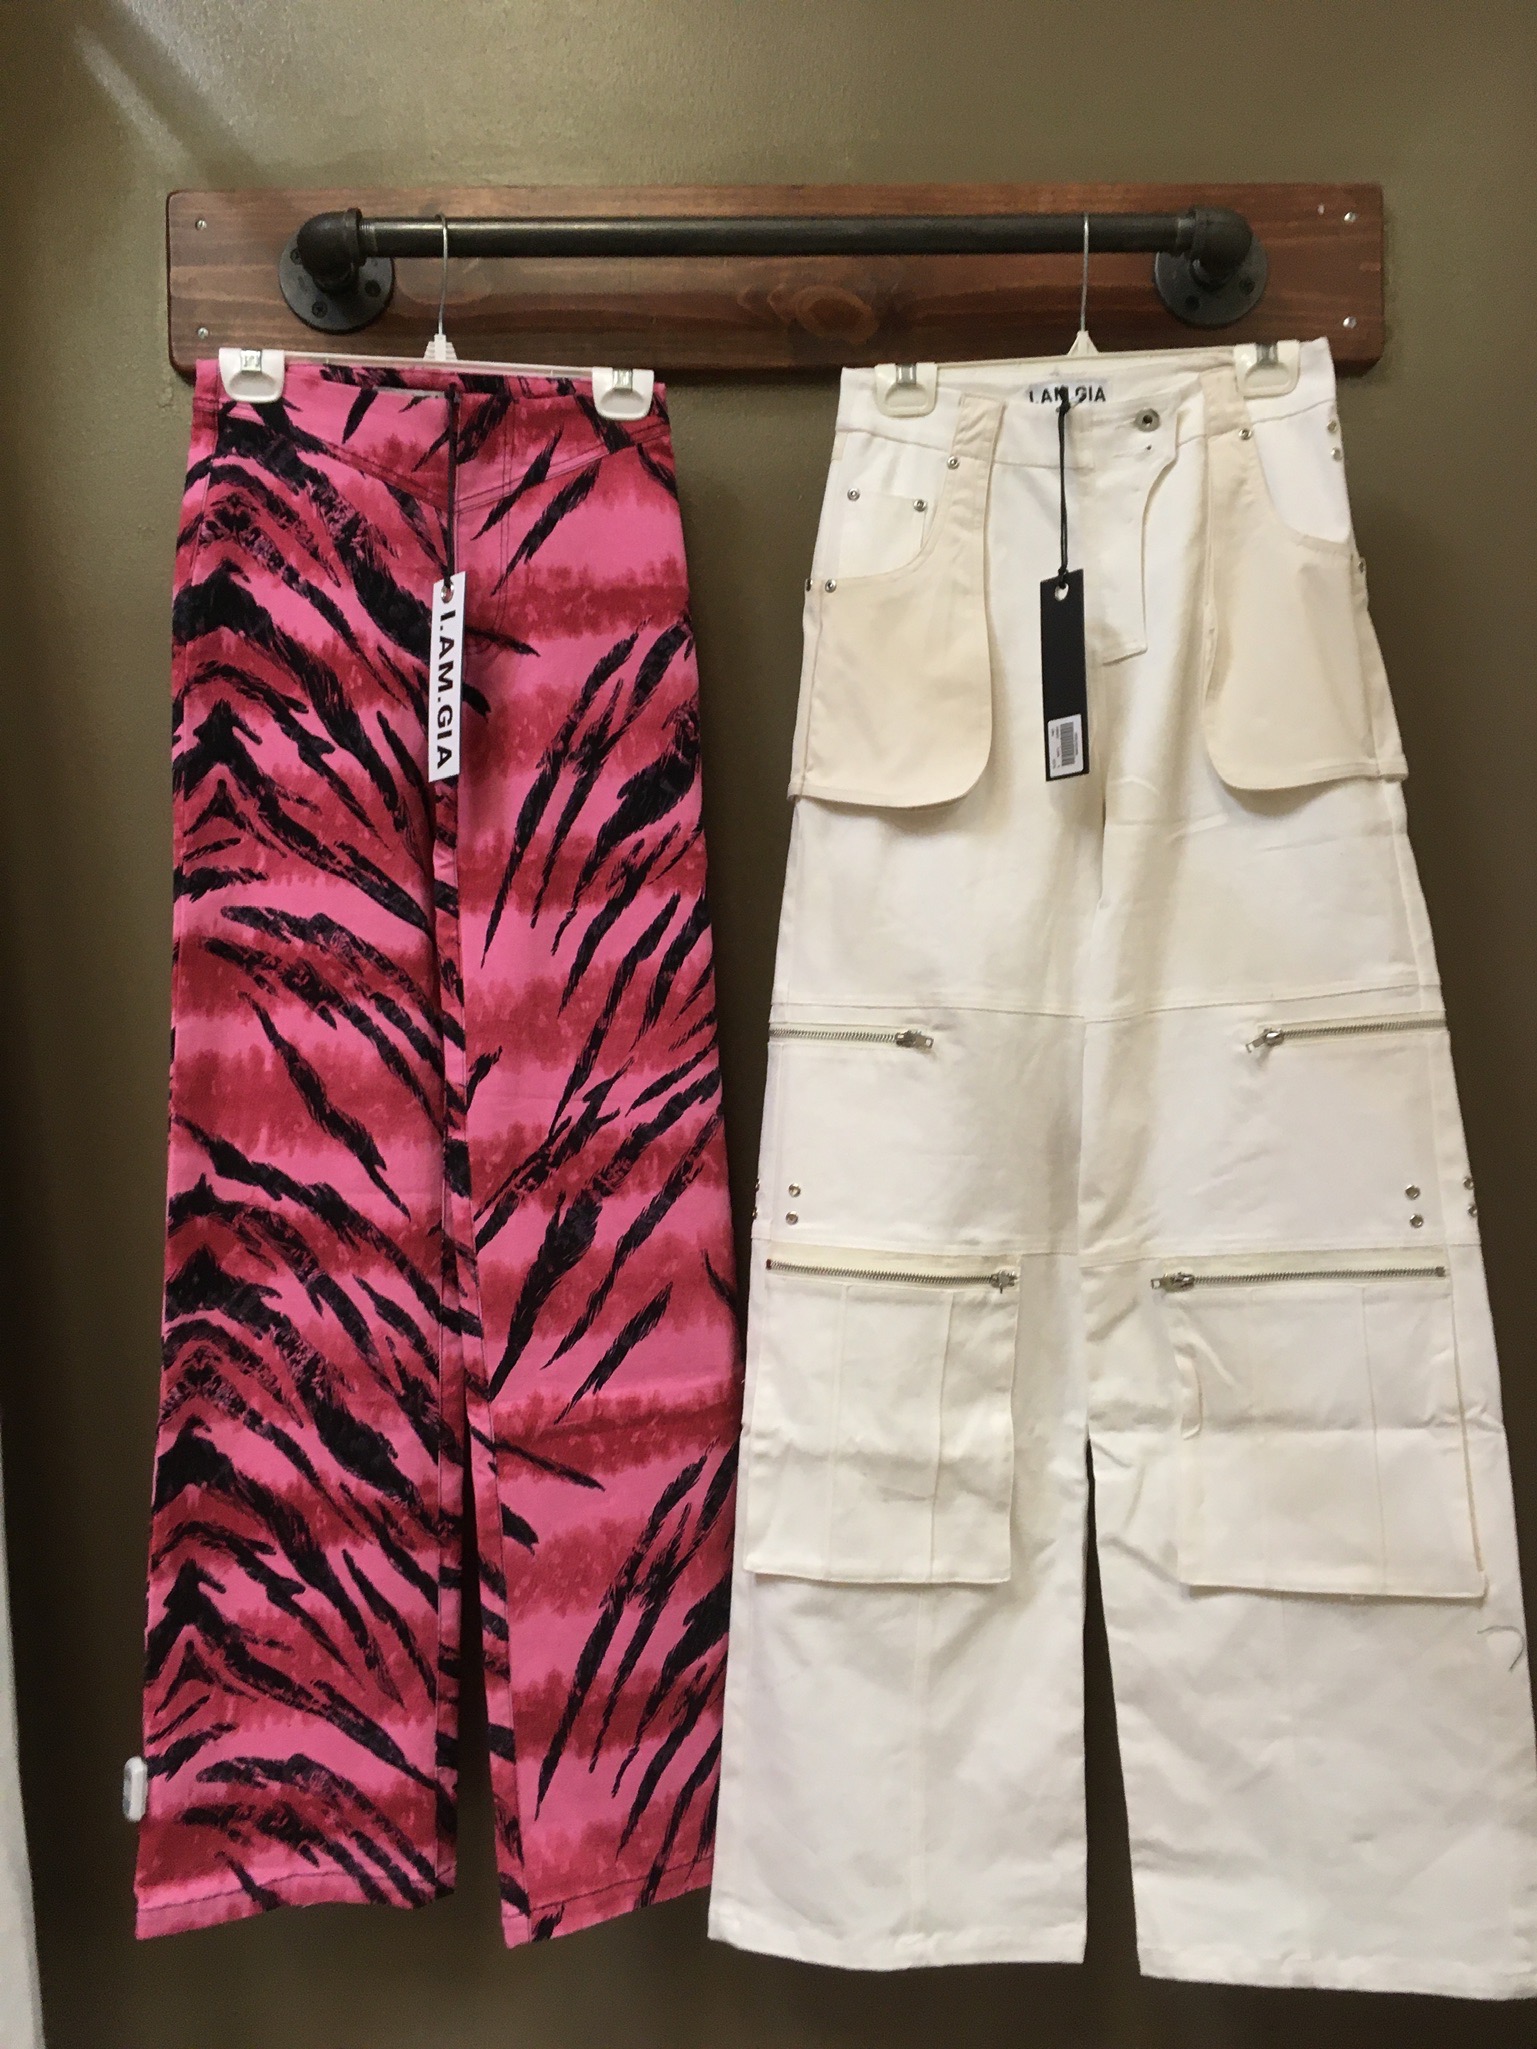 Two pairs of I.Am.Gia pants hang on a wall mounted garment bar. The left pair is pink tiger-print and the right are an off-white pair of cargo pants